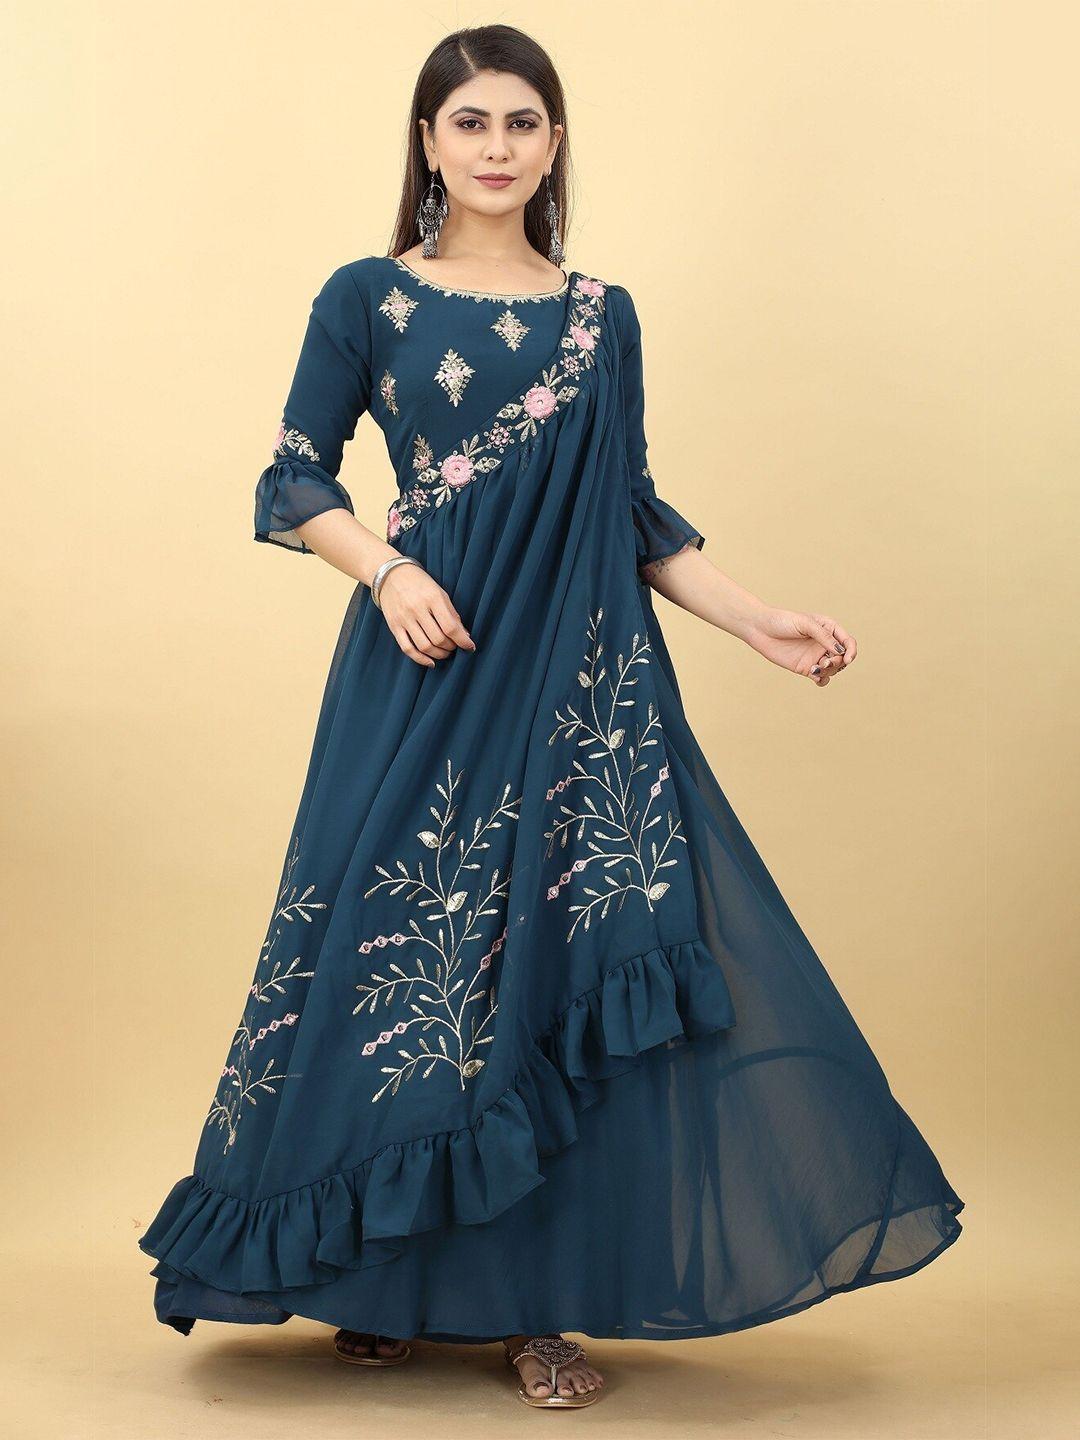 yoyo fashion floral embroidery bell sleeves georgette ethnic dress with dupatta